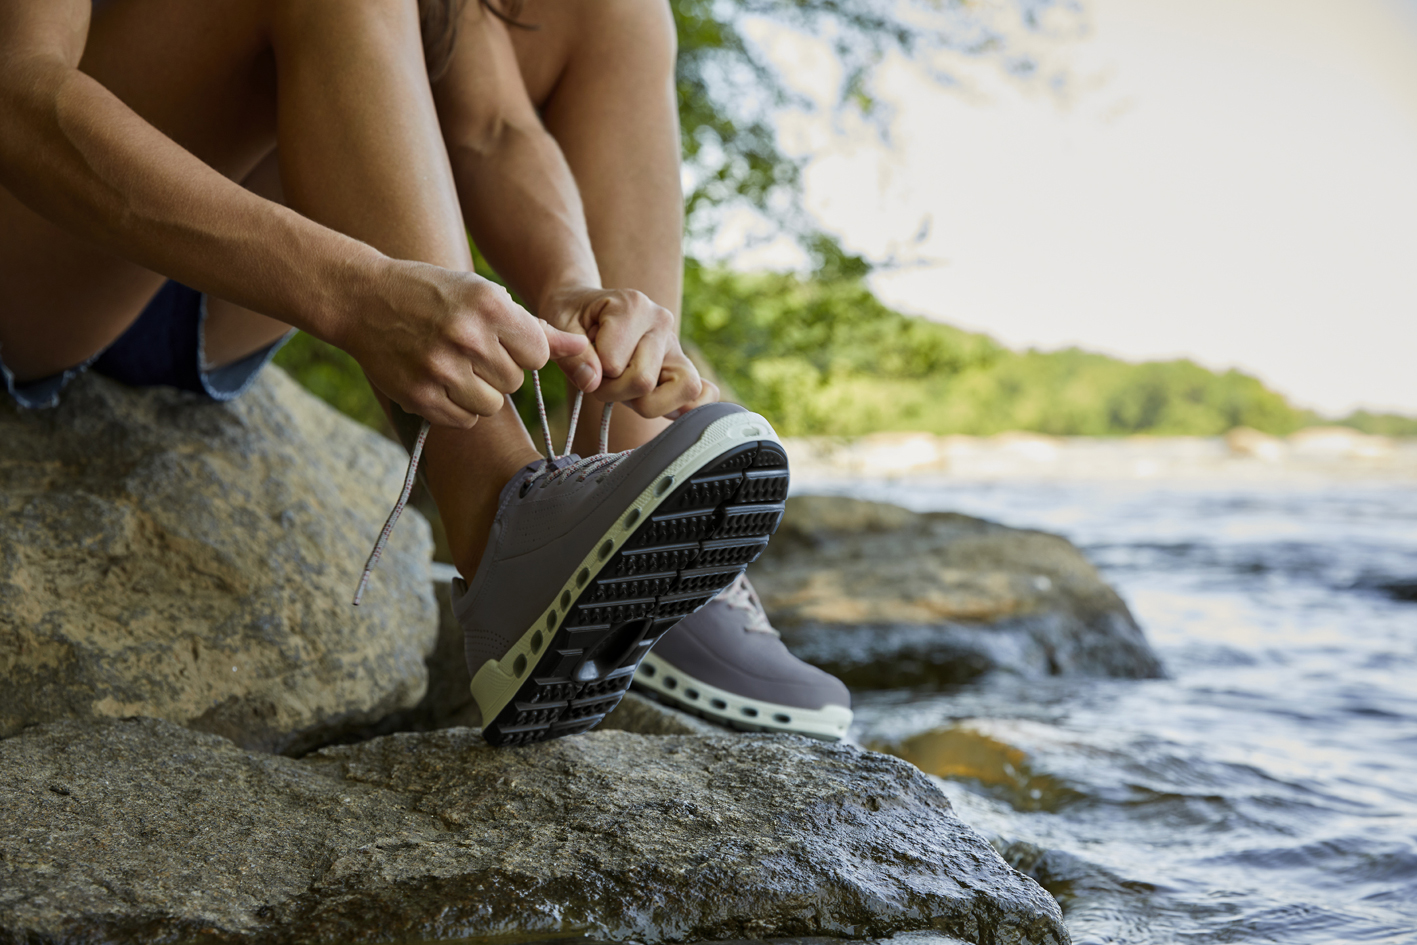 Susterra applications include footwear and outdoor apparel. © Covation Biomaterials